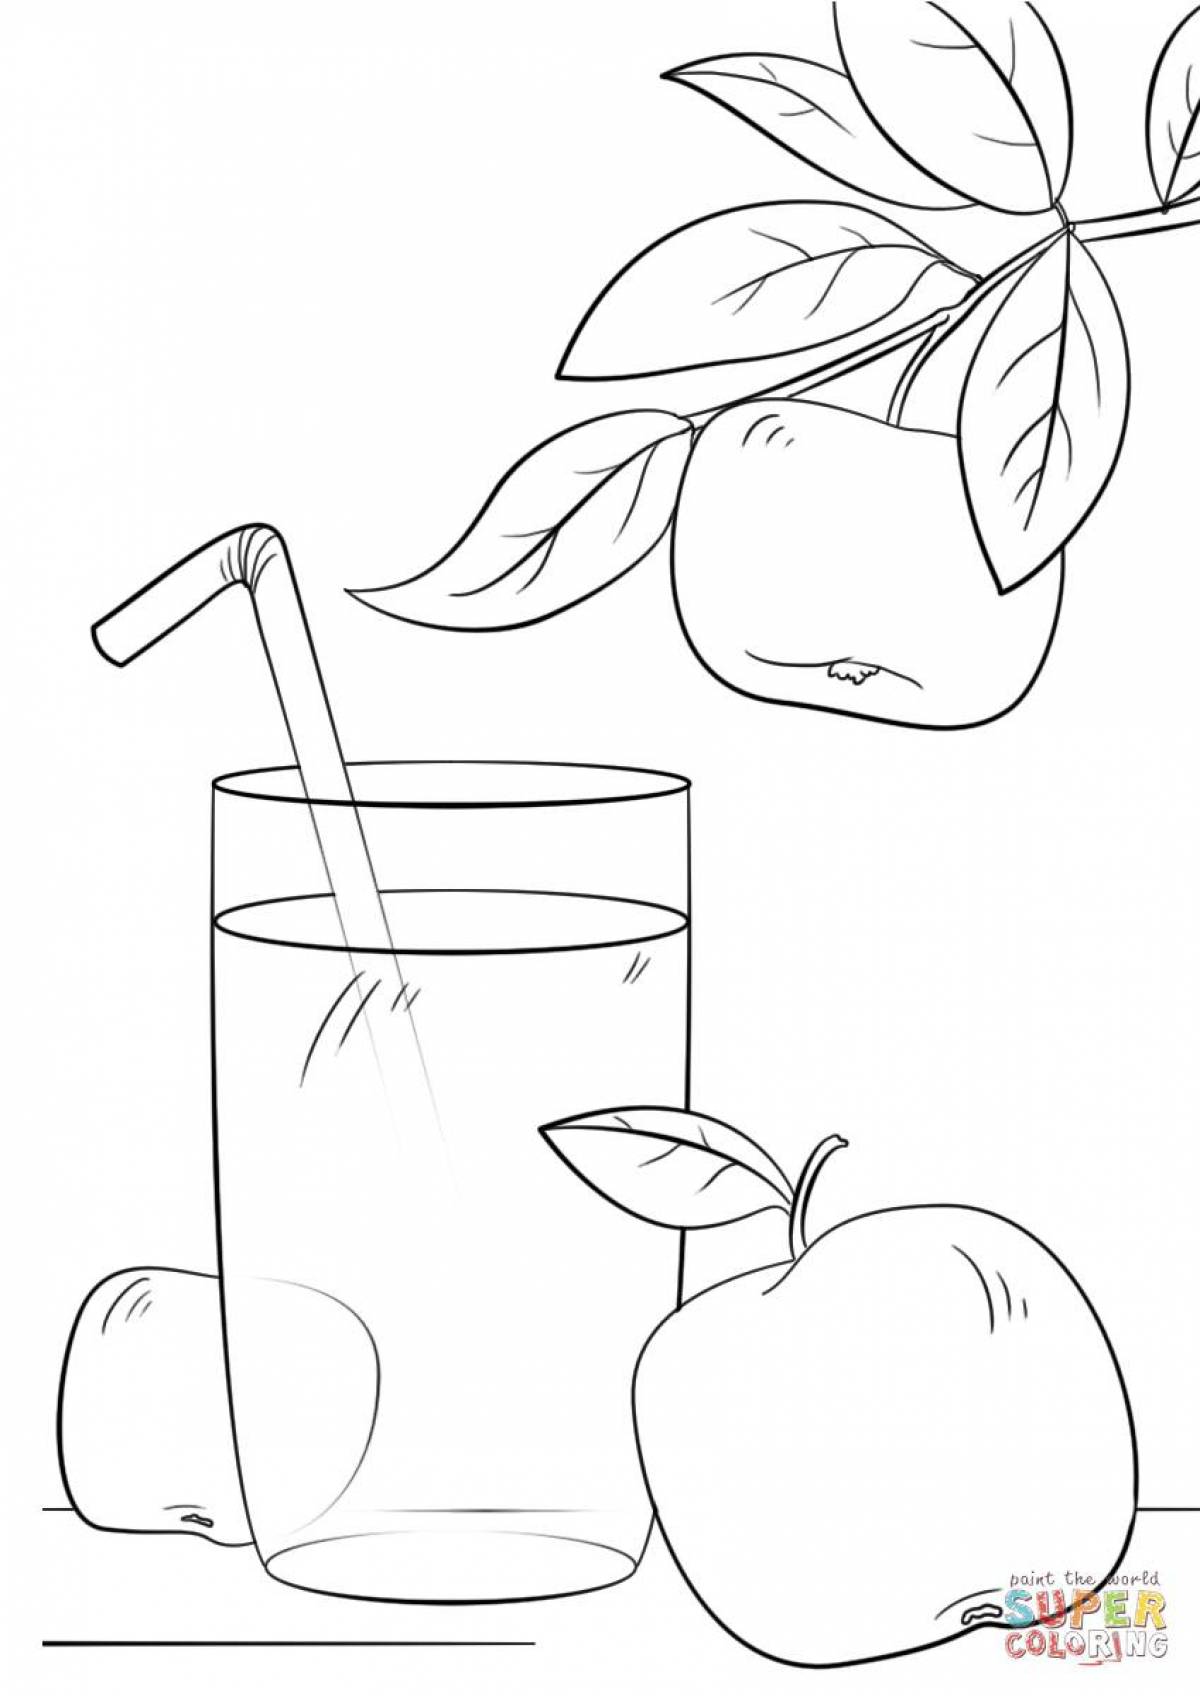 Fruit juice coloring page